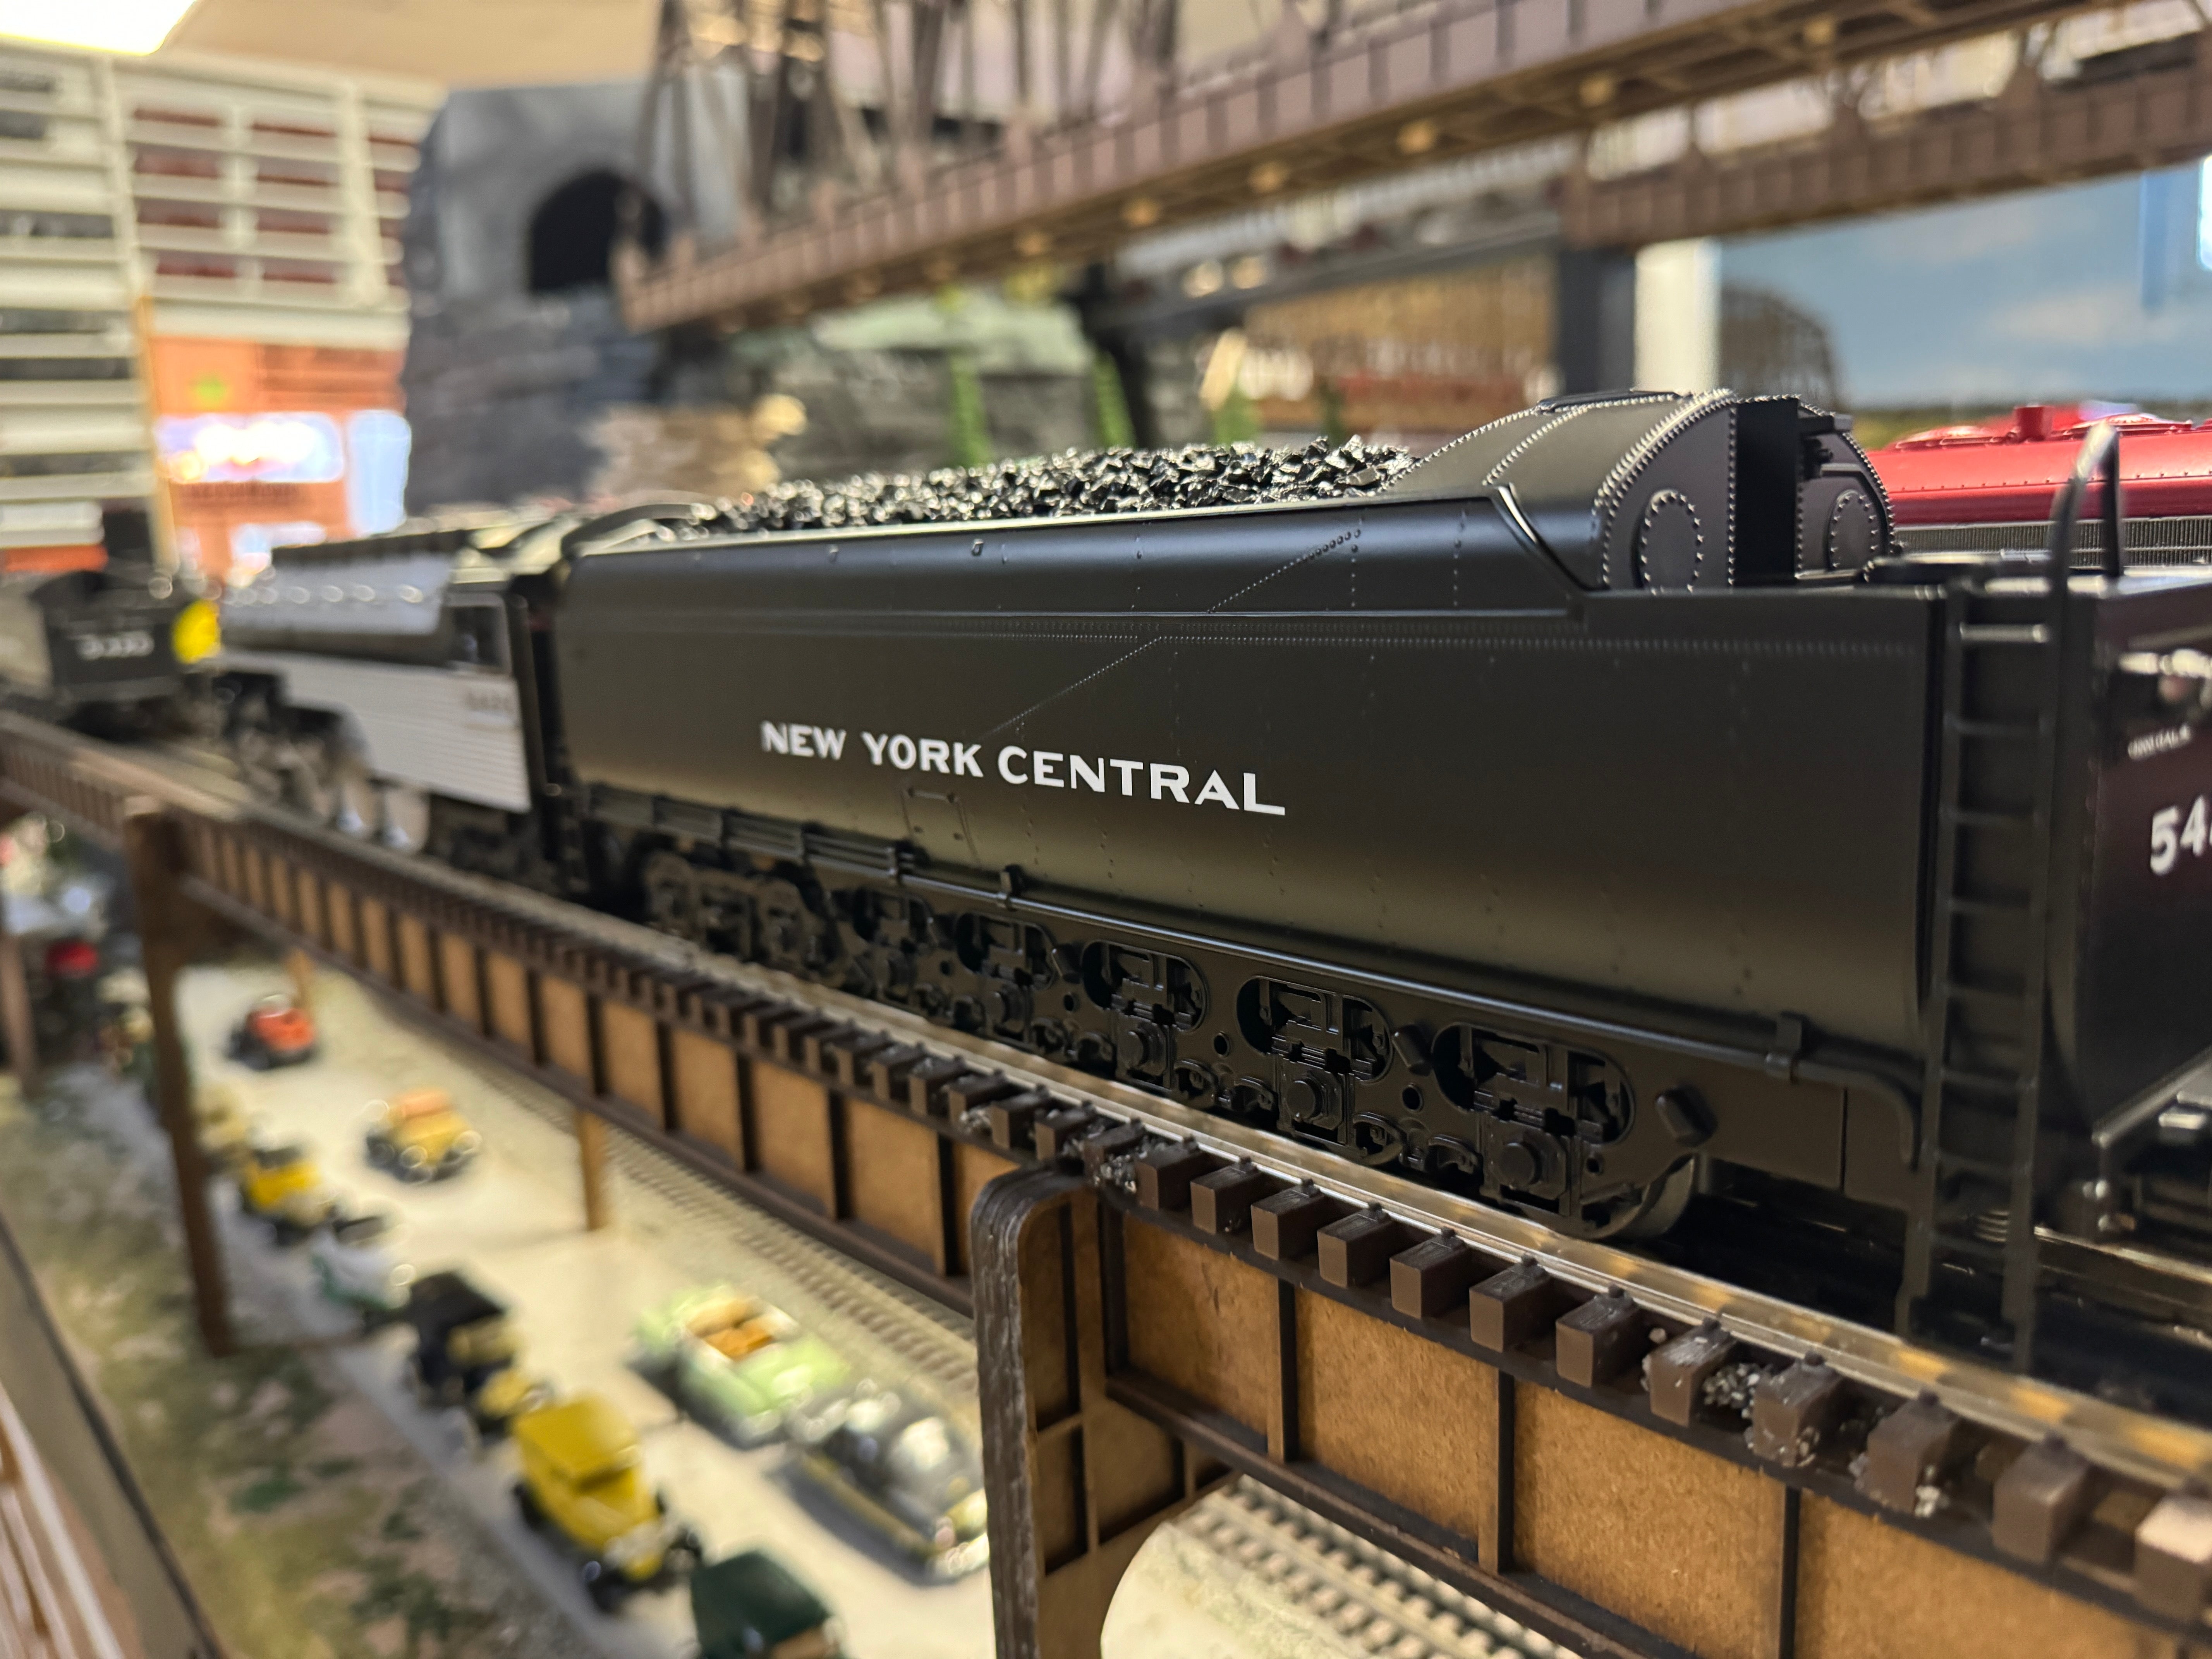 MTH 20-3921-1 - 4-6-4 Empire State Express Steam Engine "New York Central" #5426 w/ PS3 (PT Tender) - Custom Run for MrMuffin'sTrains